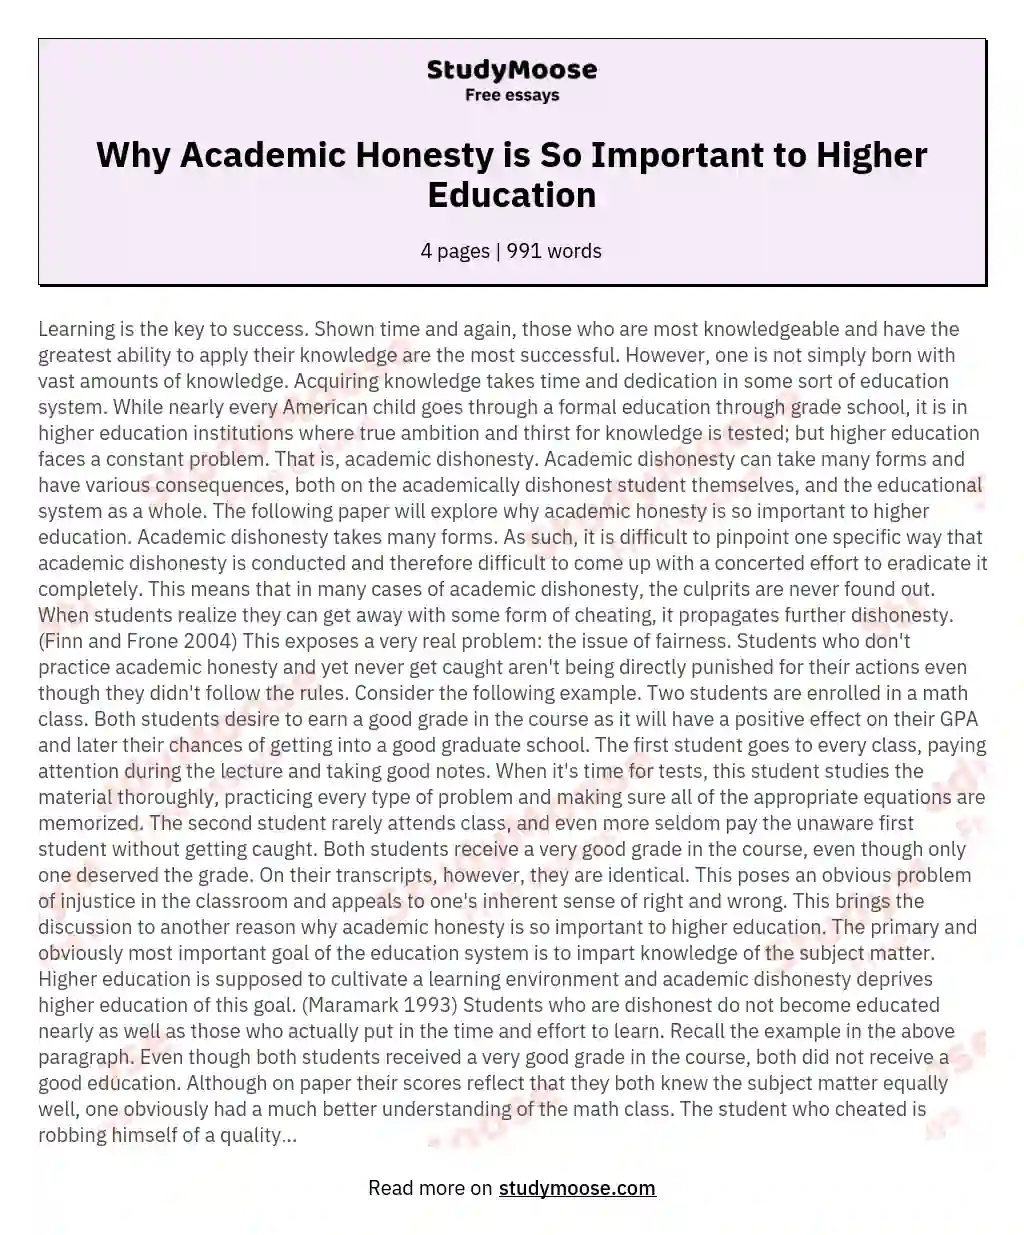 Why Academic Honesty is So Important to Higher Education essay